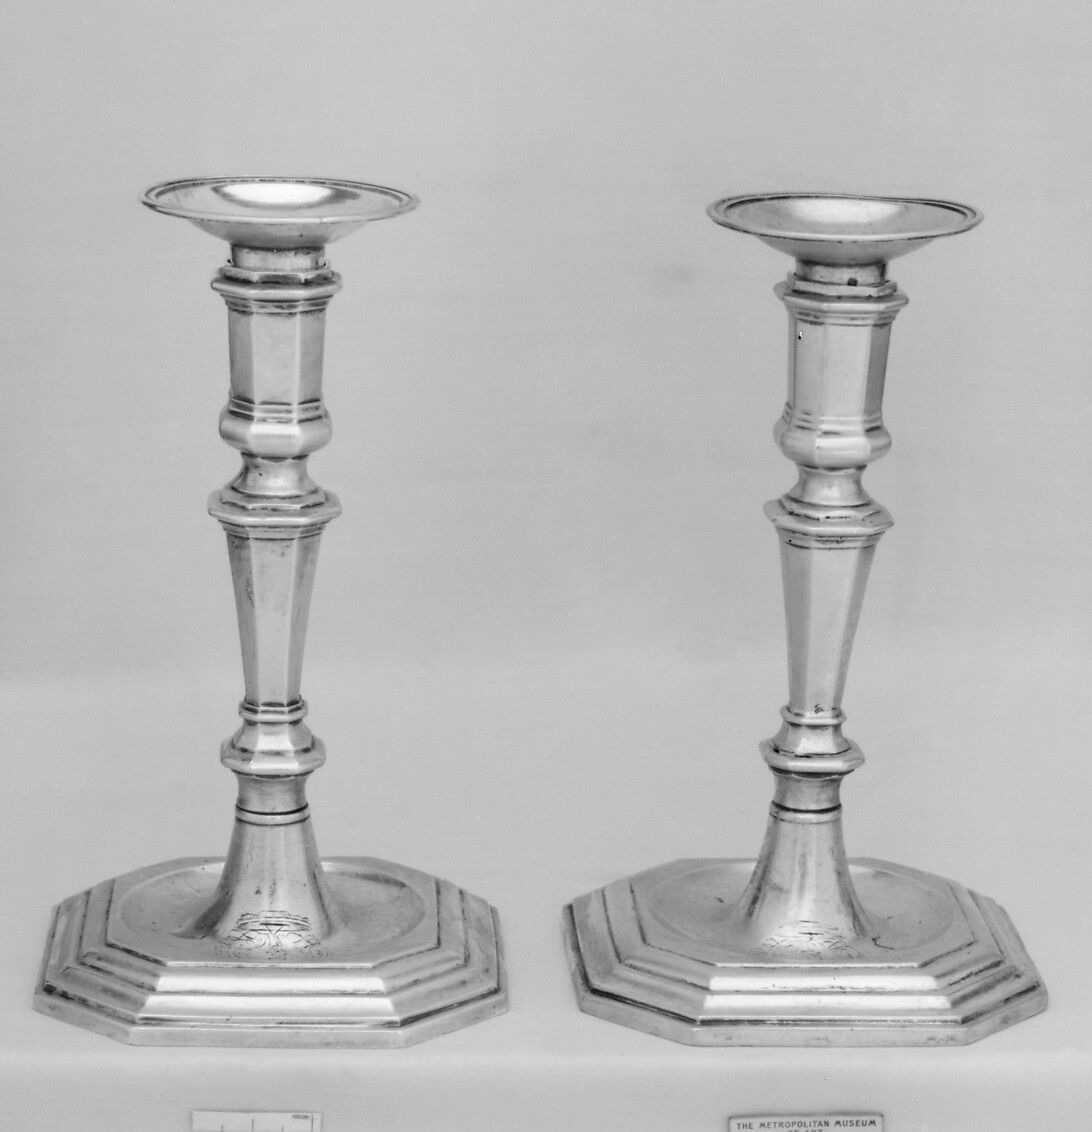 Pair of bobêches for candlesticks, Silver, Italian, Perugia 